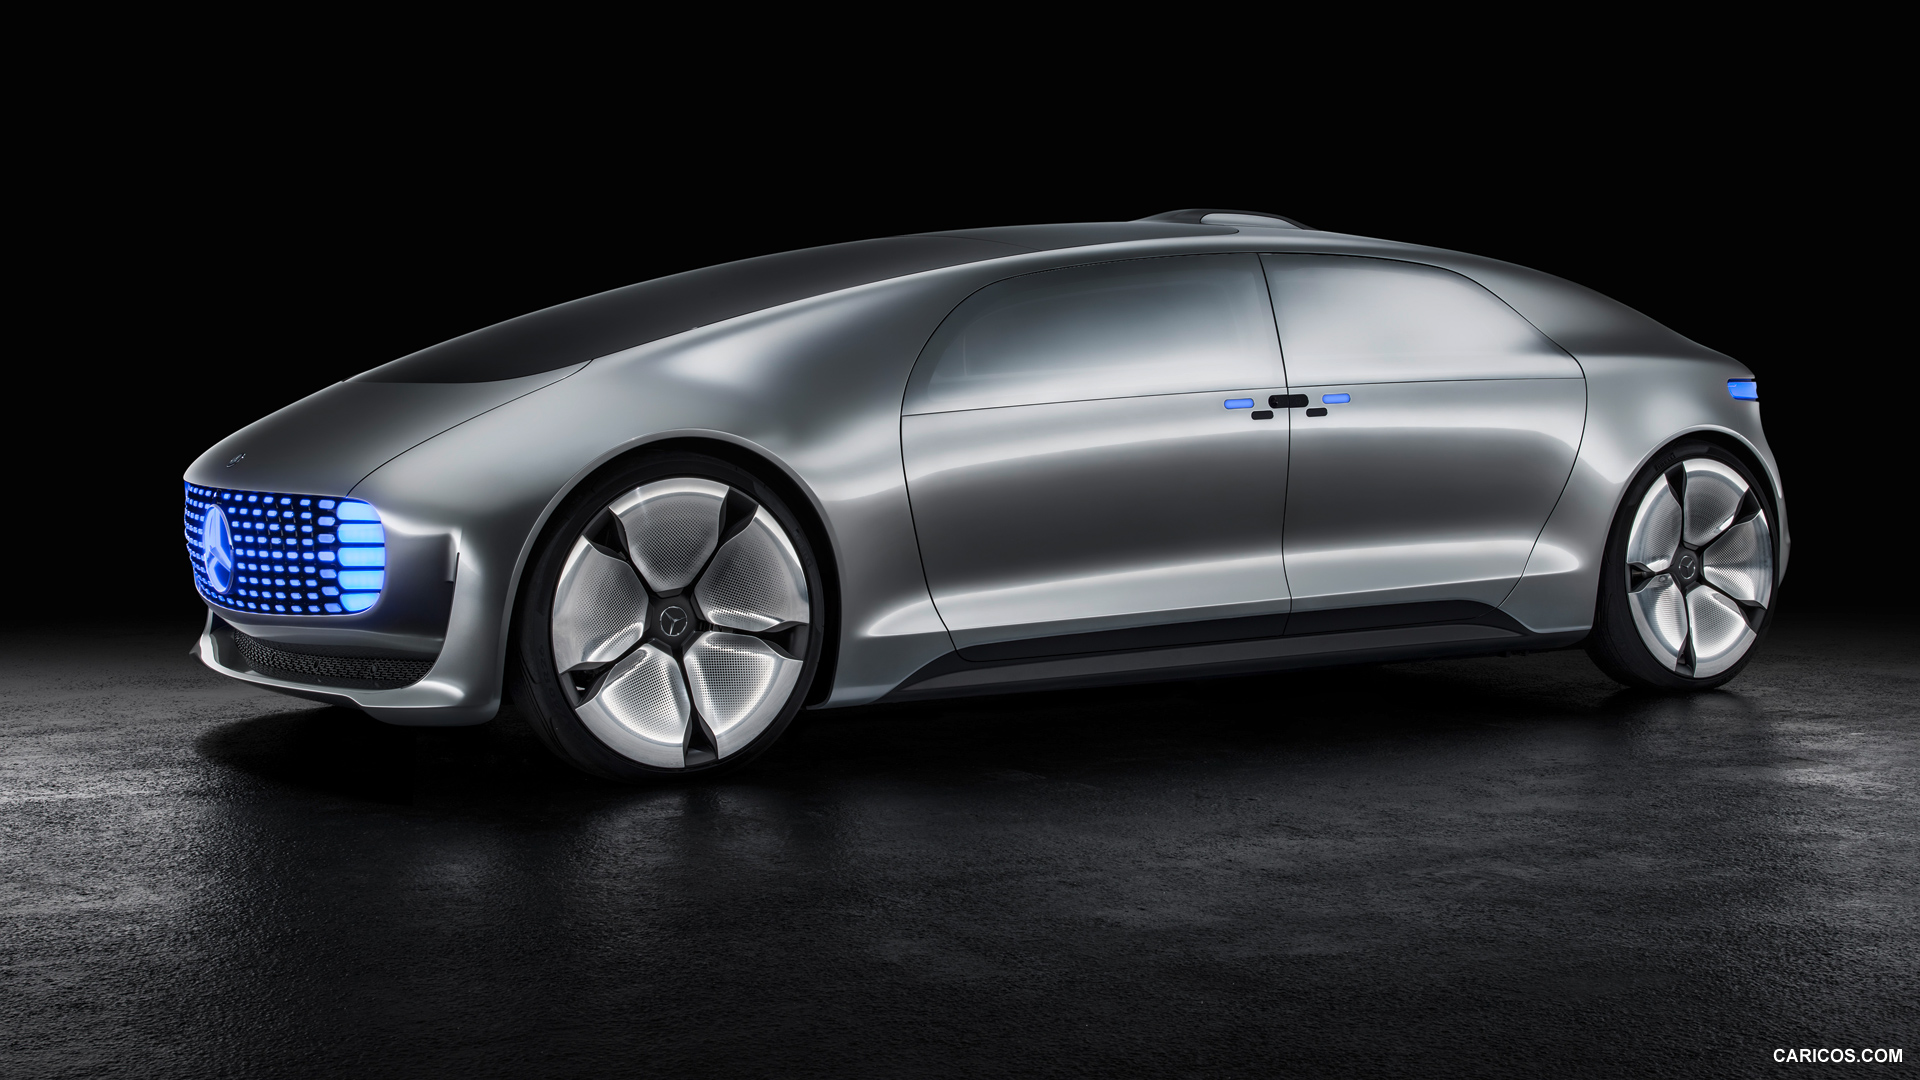 2015 Mercedes-Benz F 015 Luxury in Motion Concept  - Side, #46 of 92